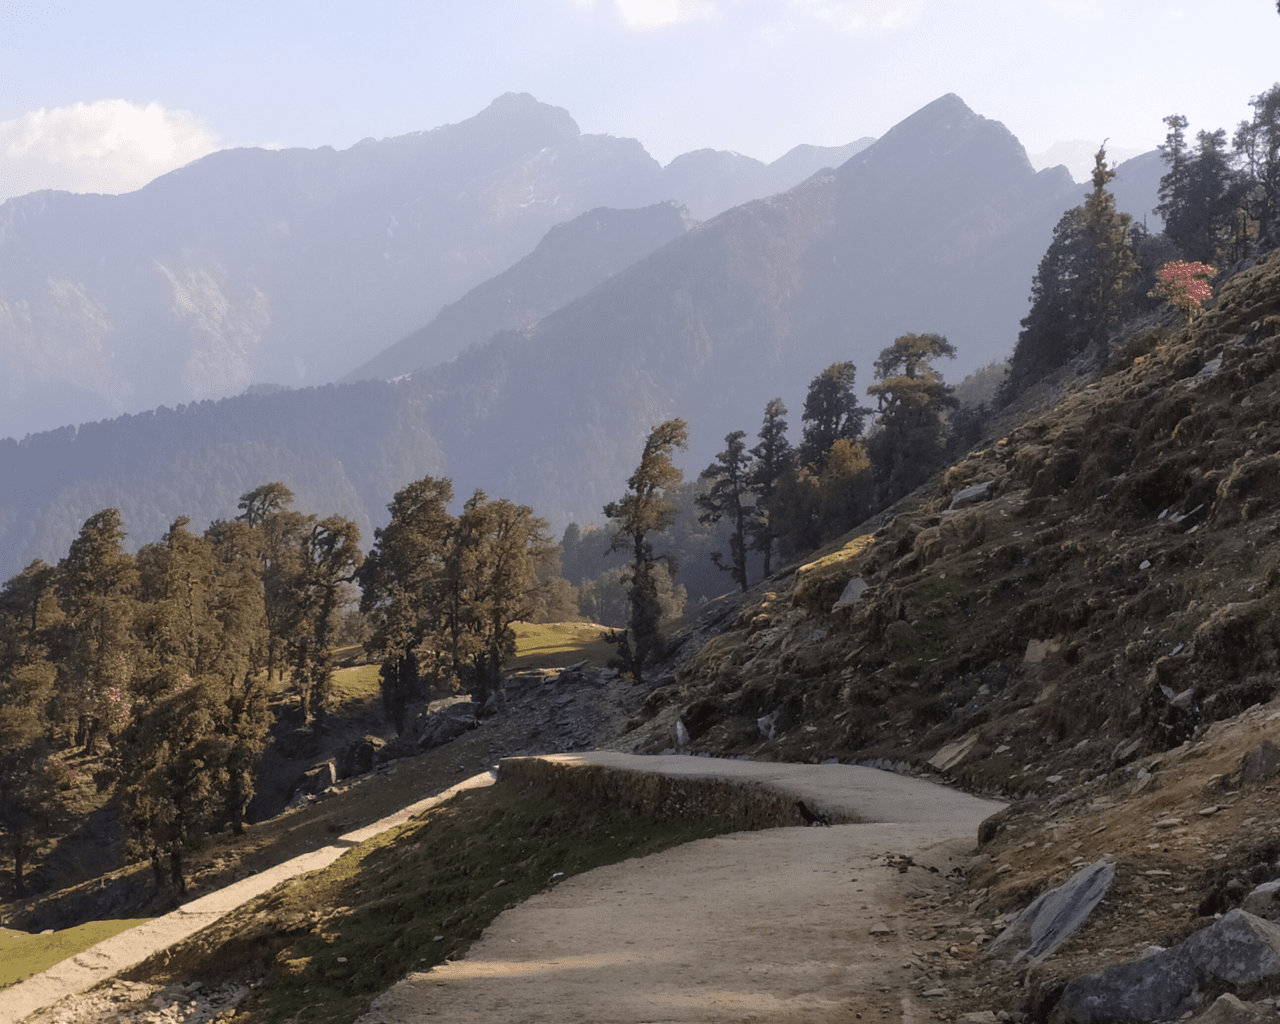 Places to visit nearby Rudraprayag